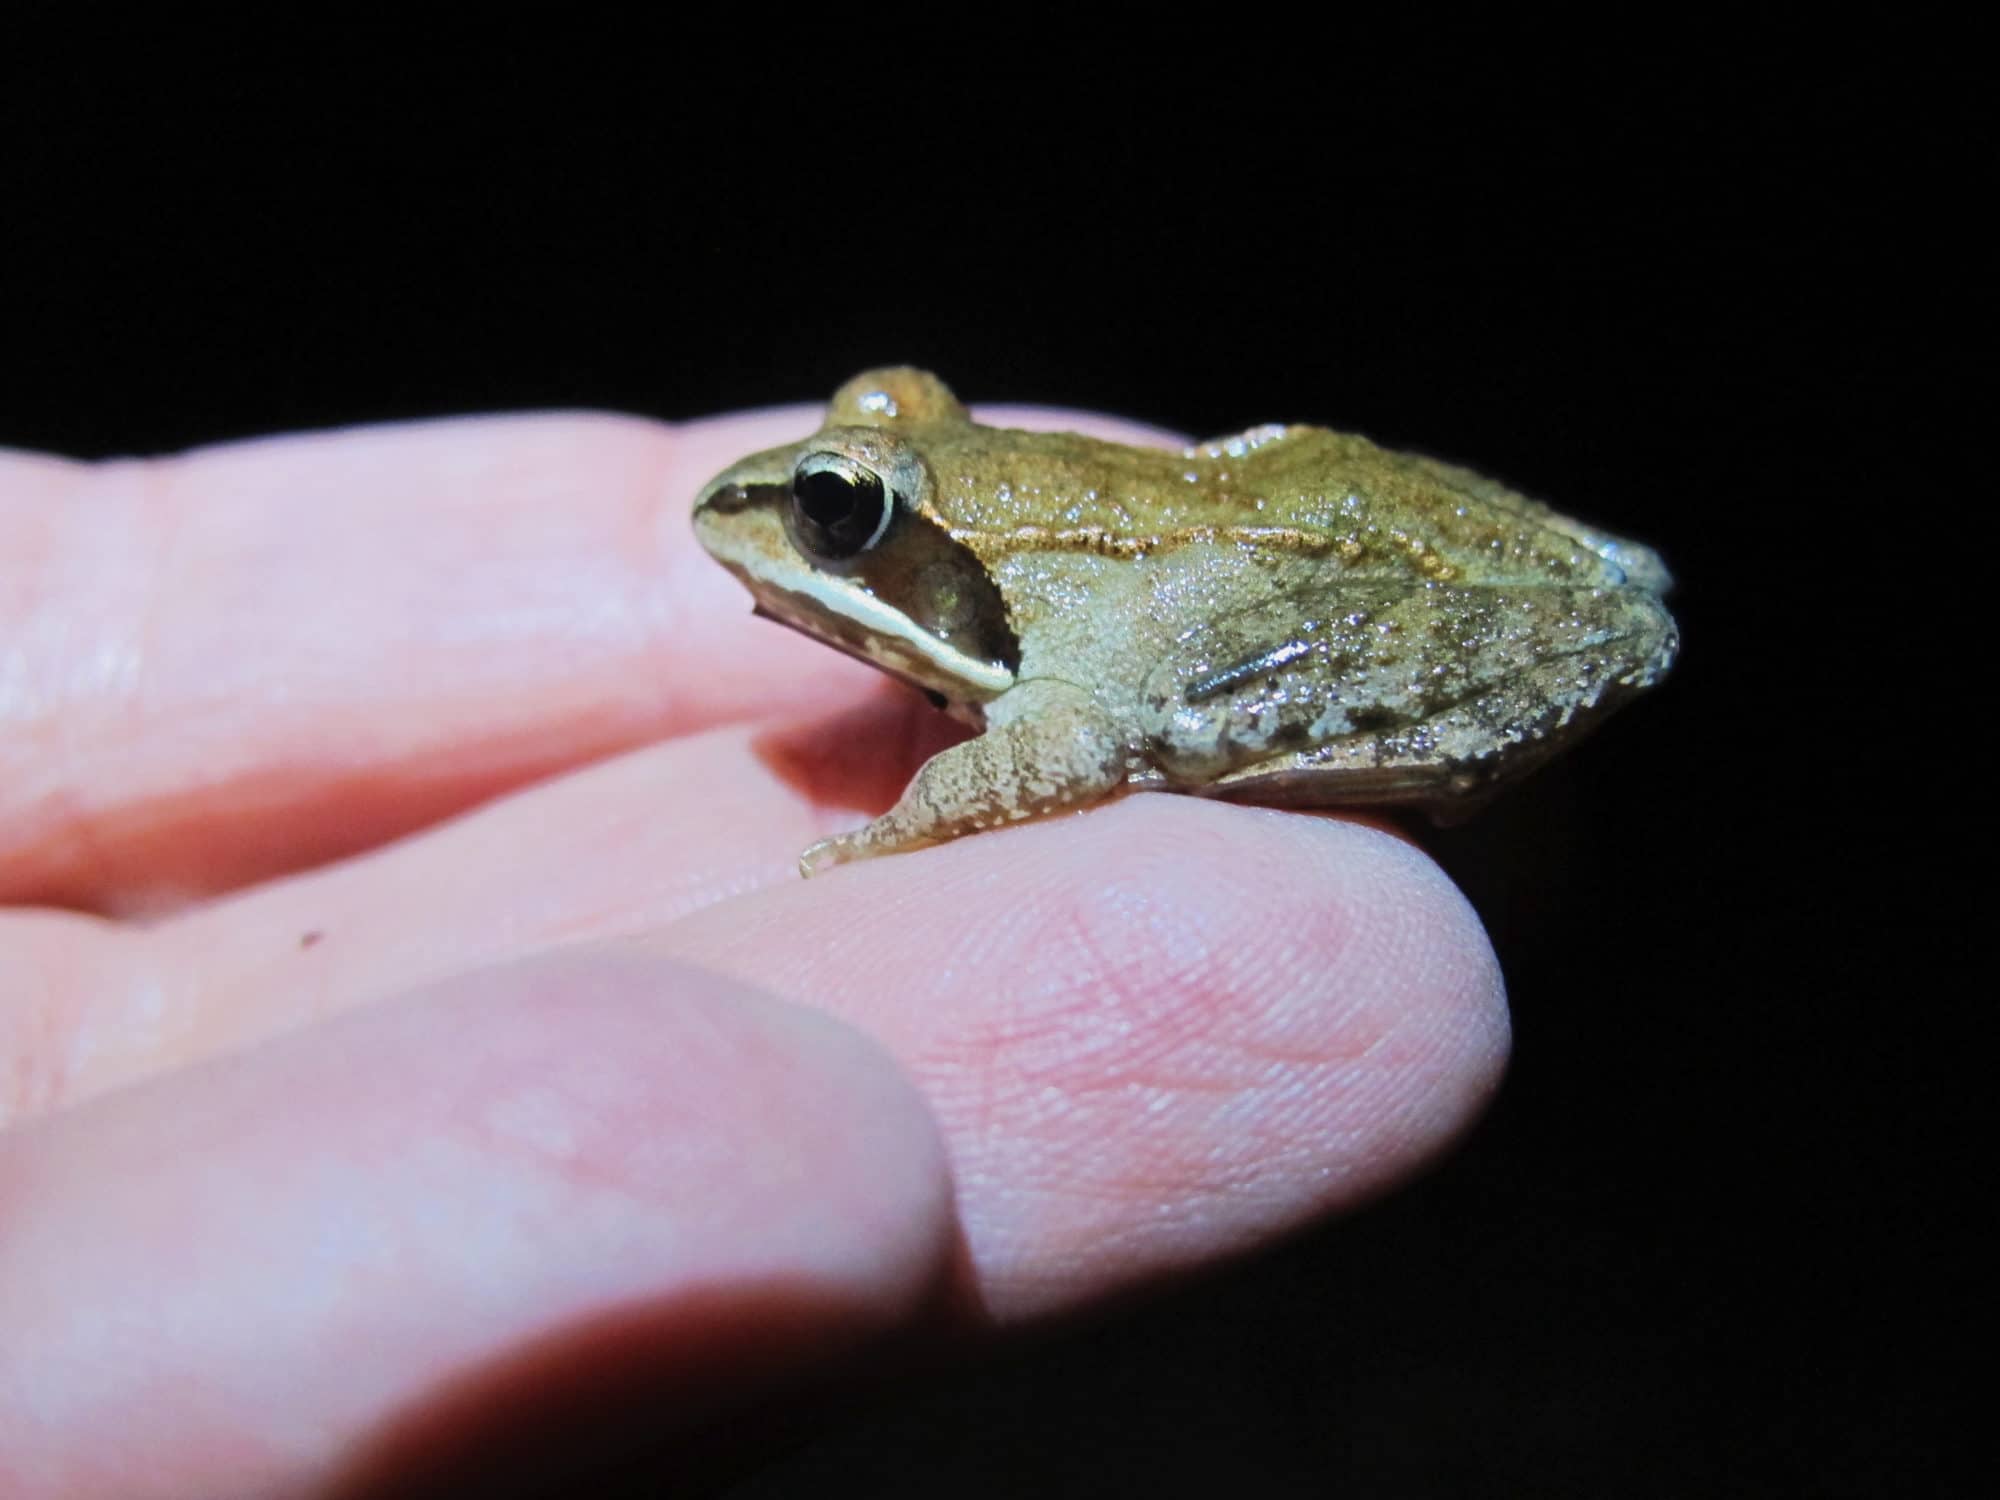 A juvenile wood frog gets a helping hand on May 4. (photo © Brett Amy Thelen)